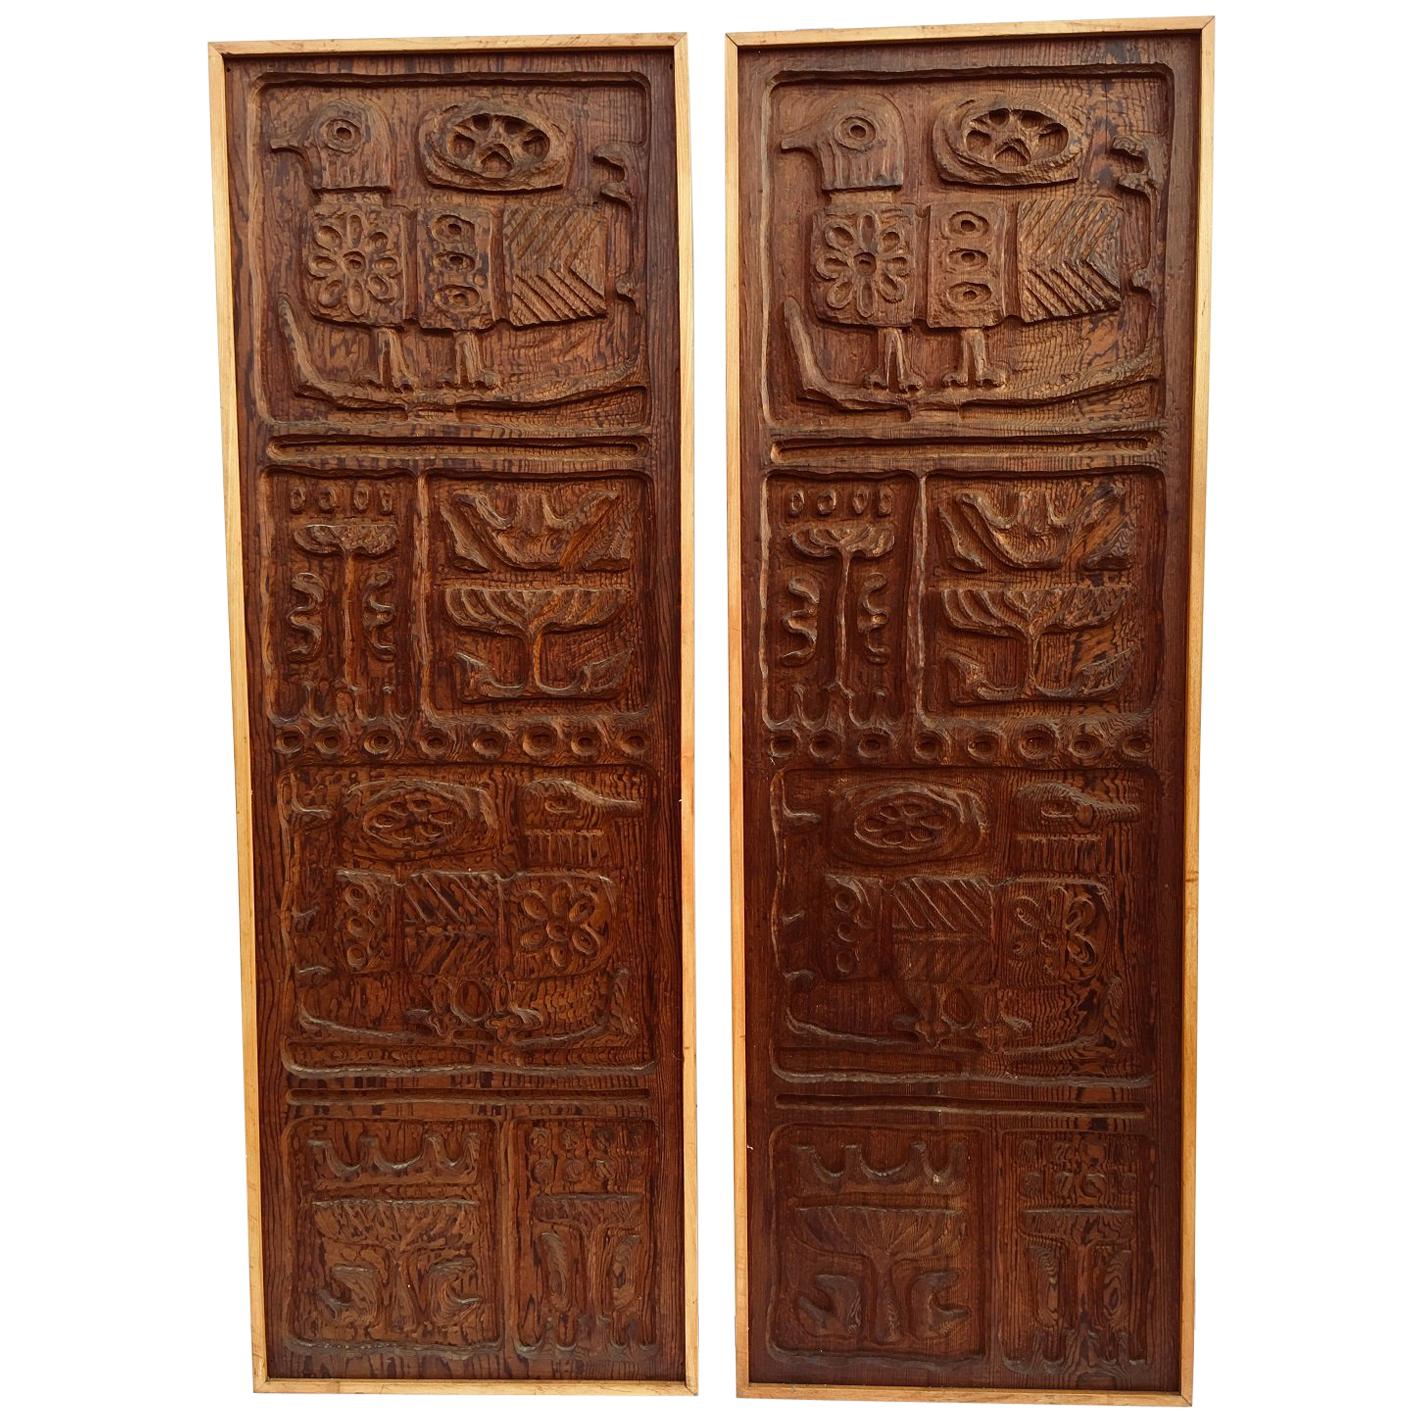 Mcm Rare Pair of Evelyn Ackerman Wood Carved Panels for Panelcarve Evie’s Birds